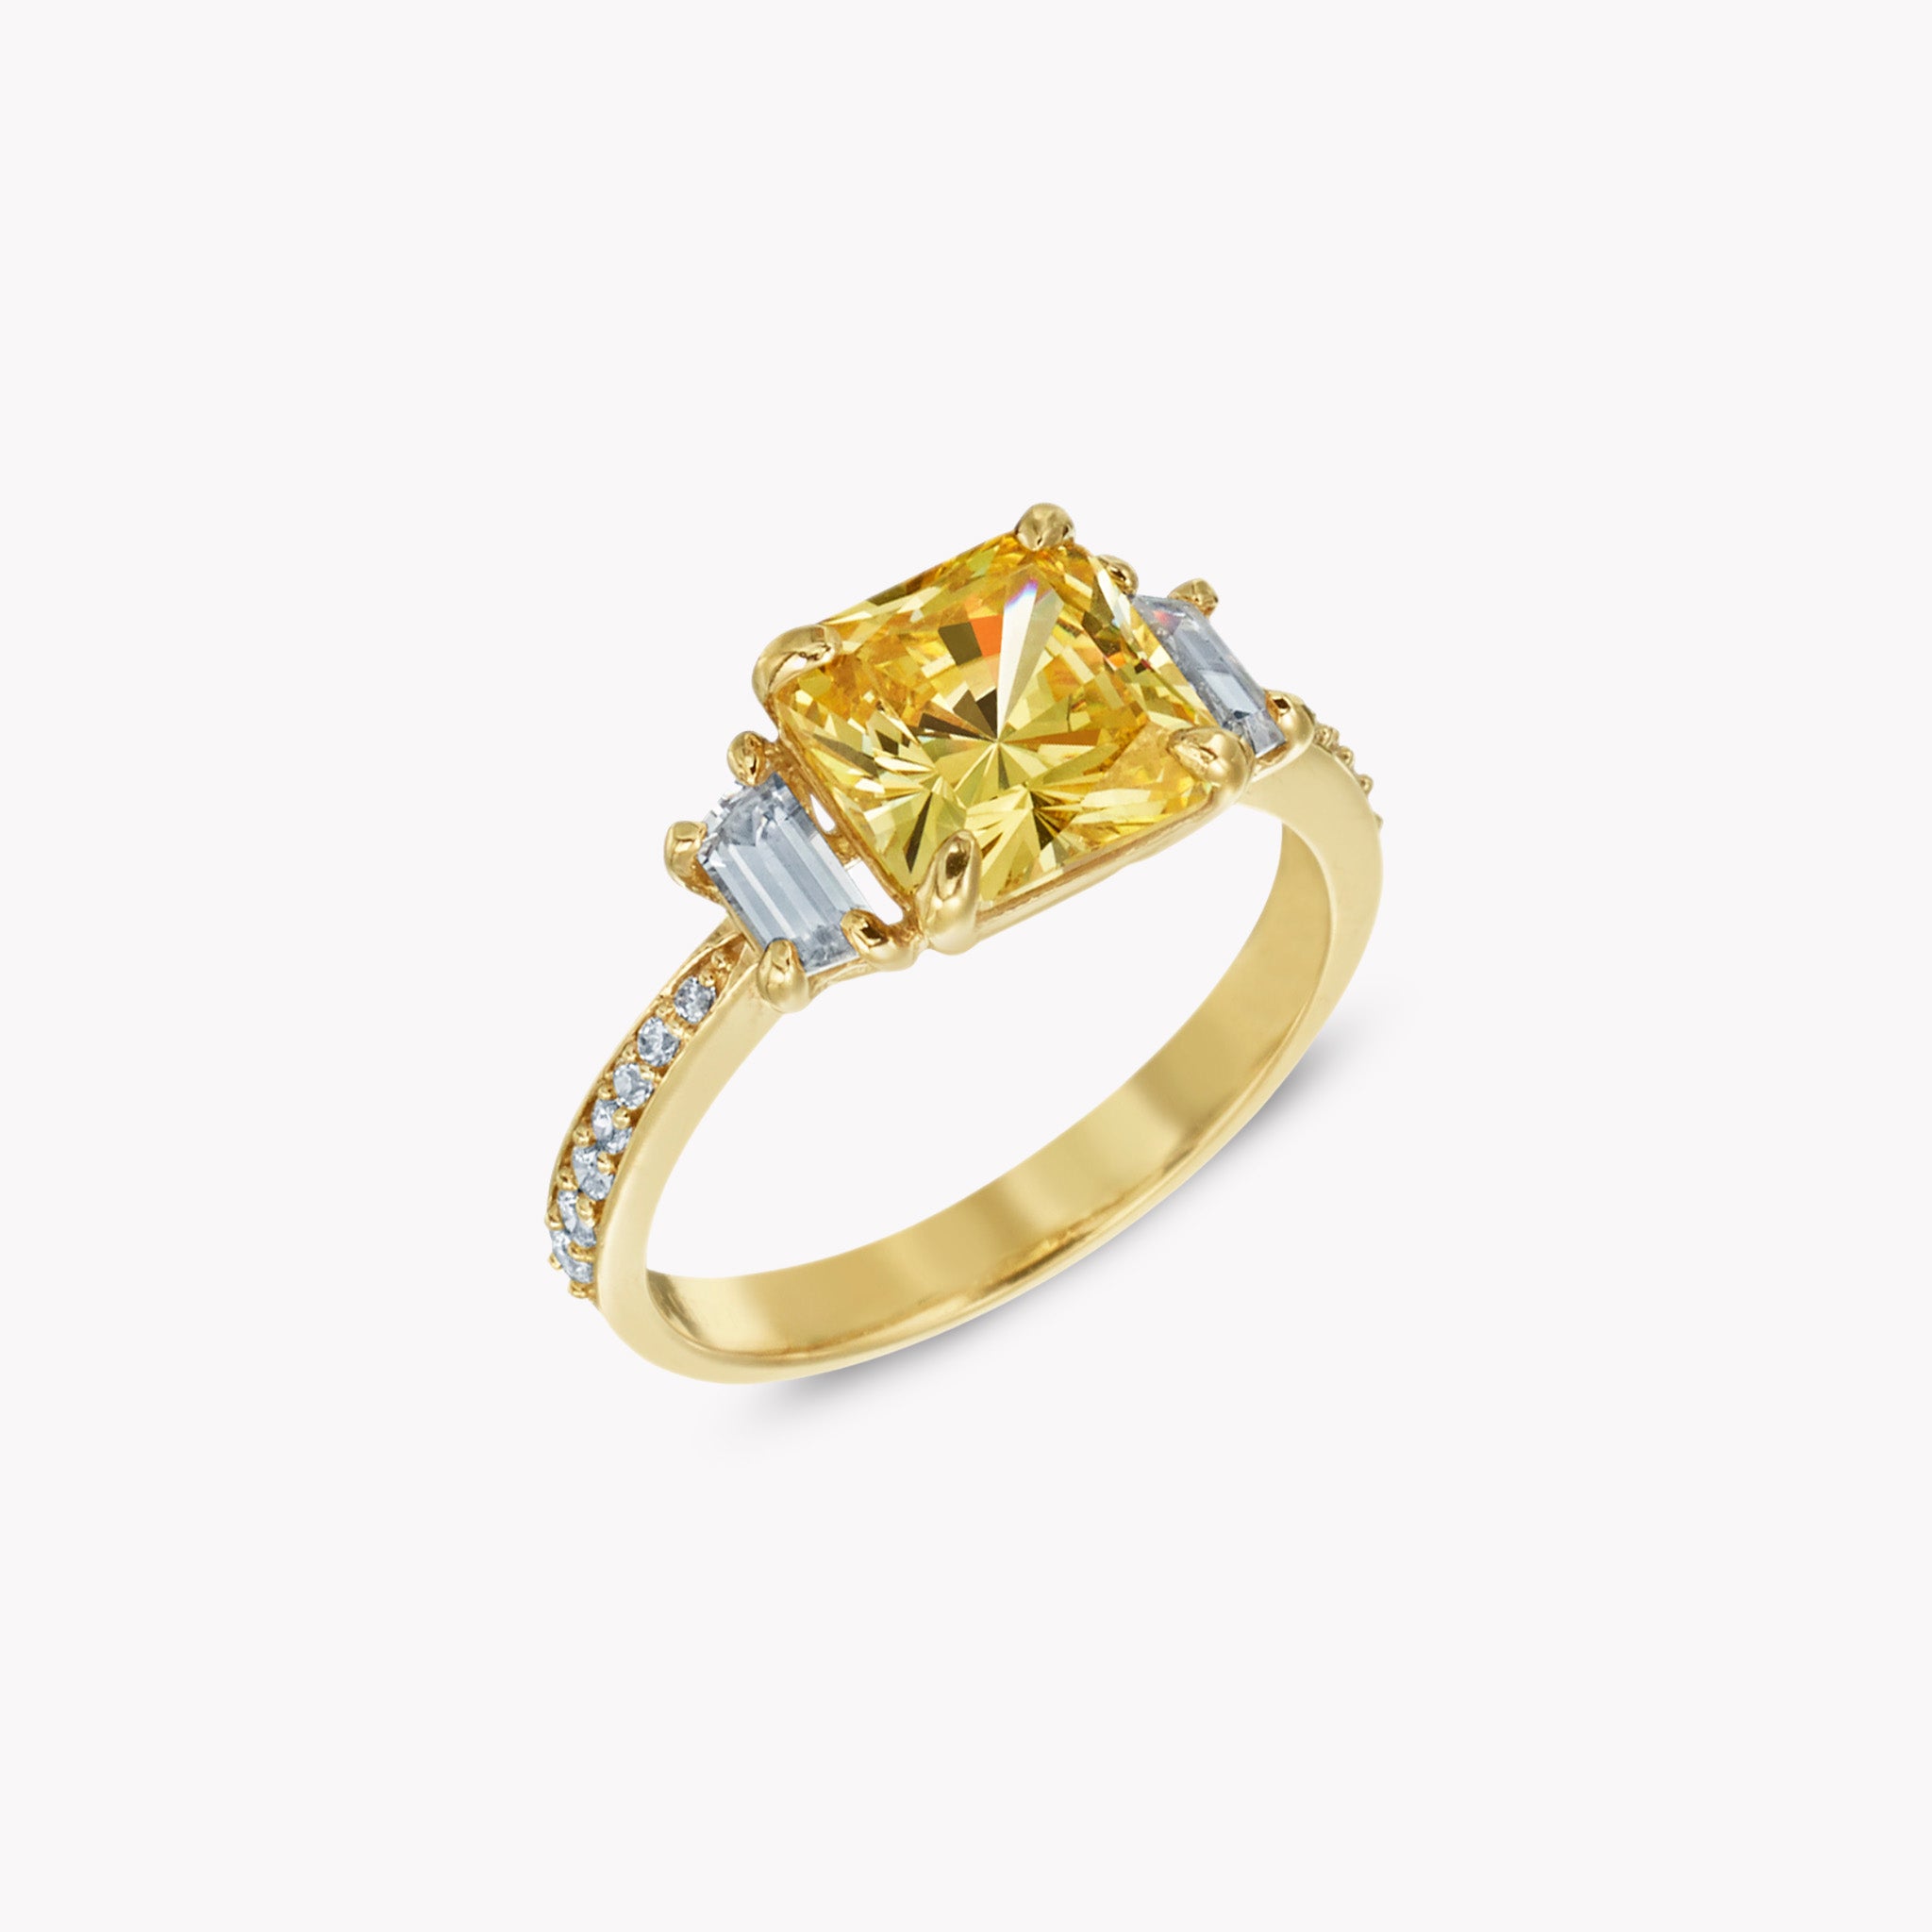 Pave 3 Stone Ring